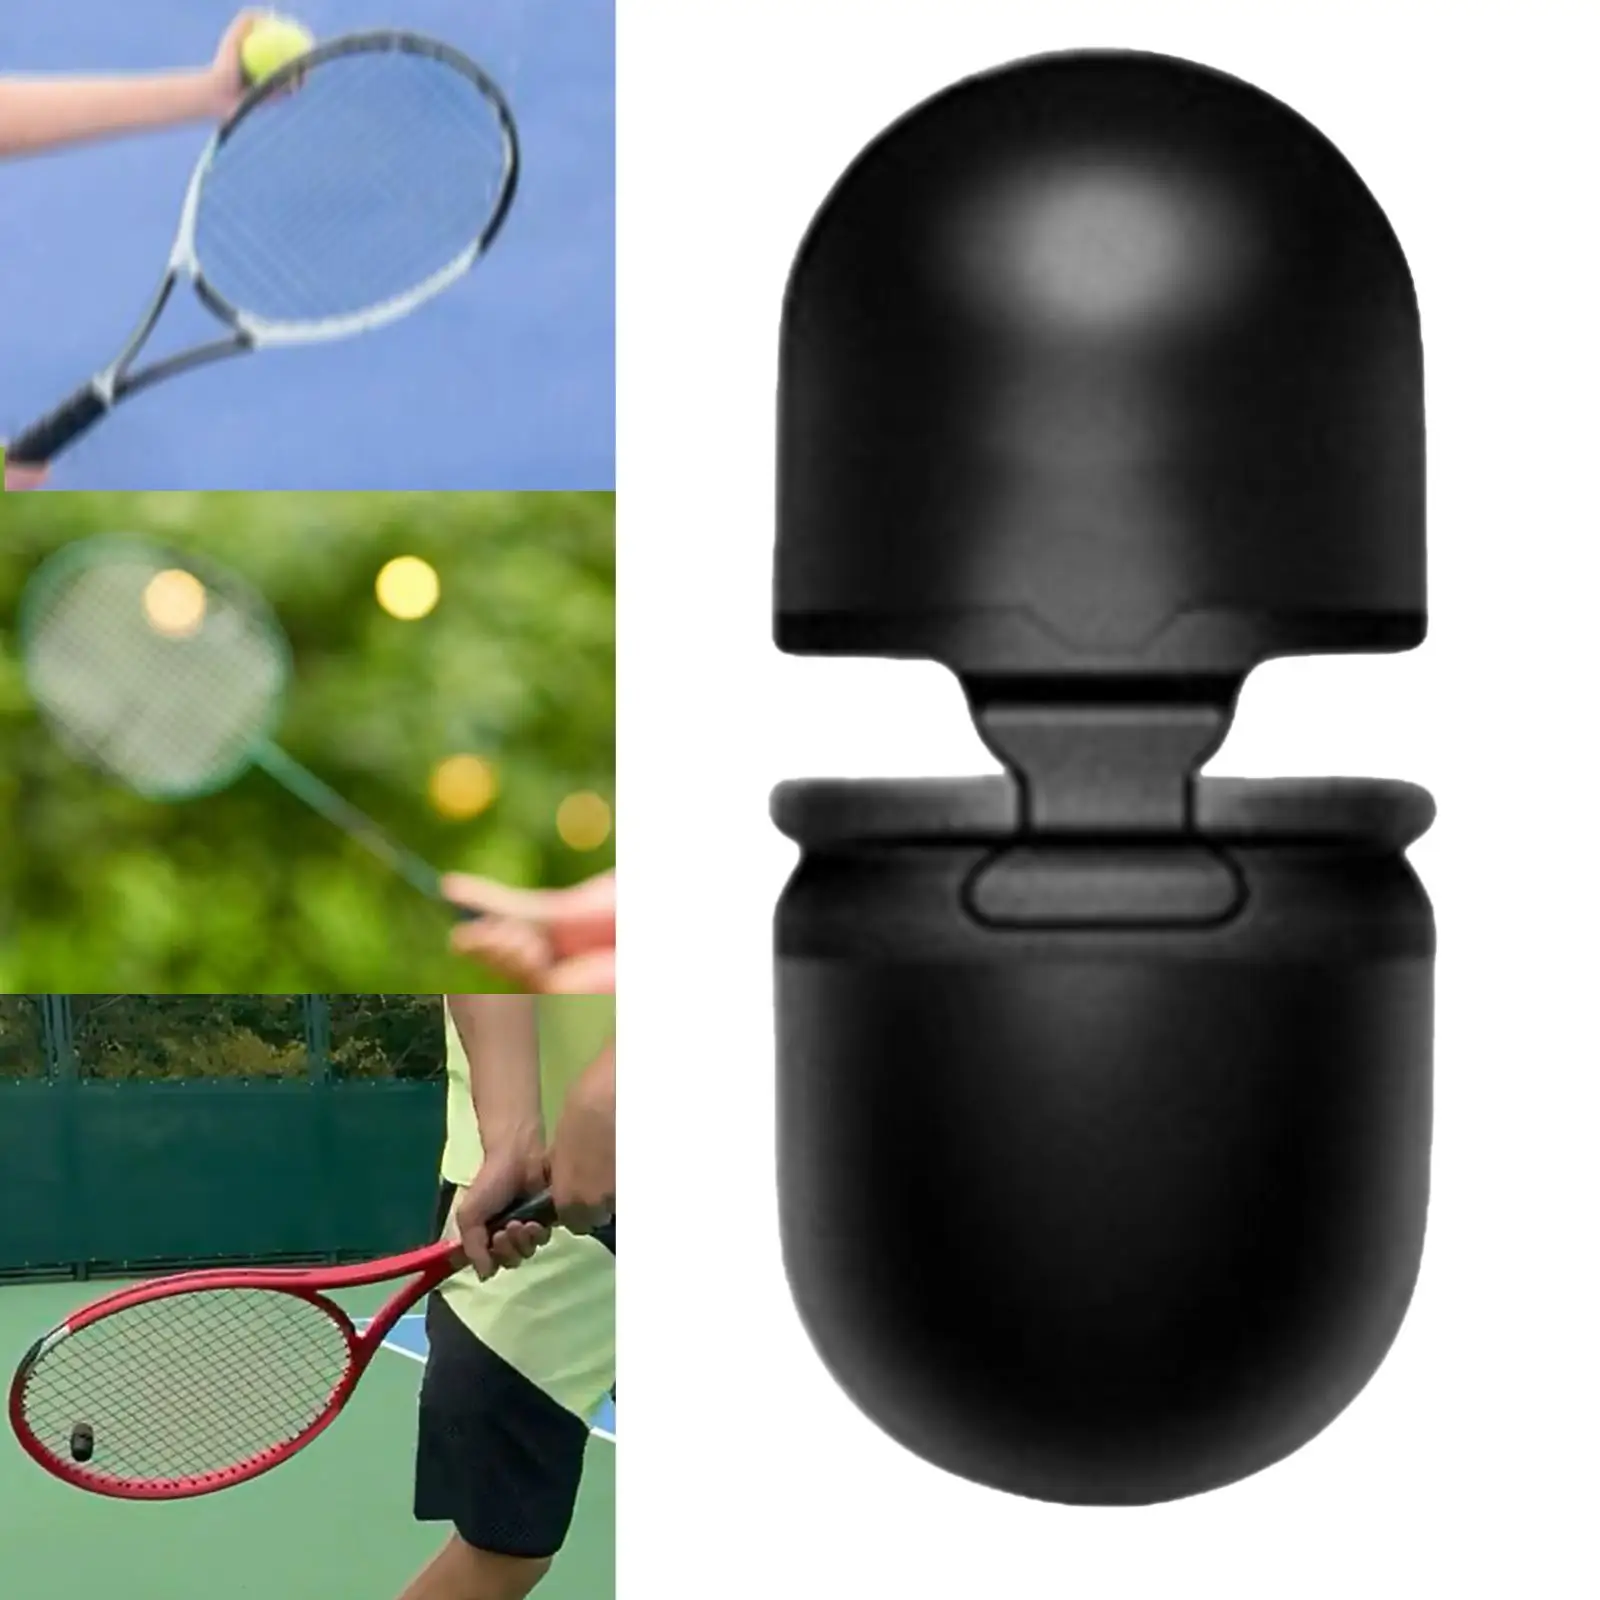 Tennis Topspin Whistle Tennis Hitting Trainer Equipment Get Faster Swing Speed